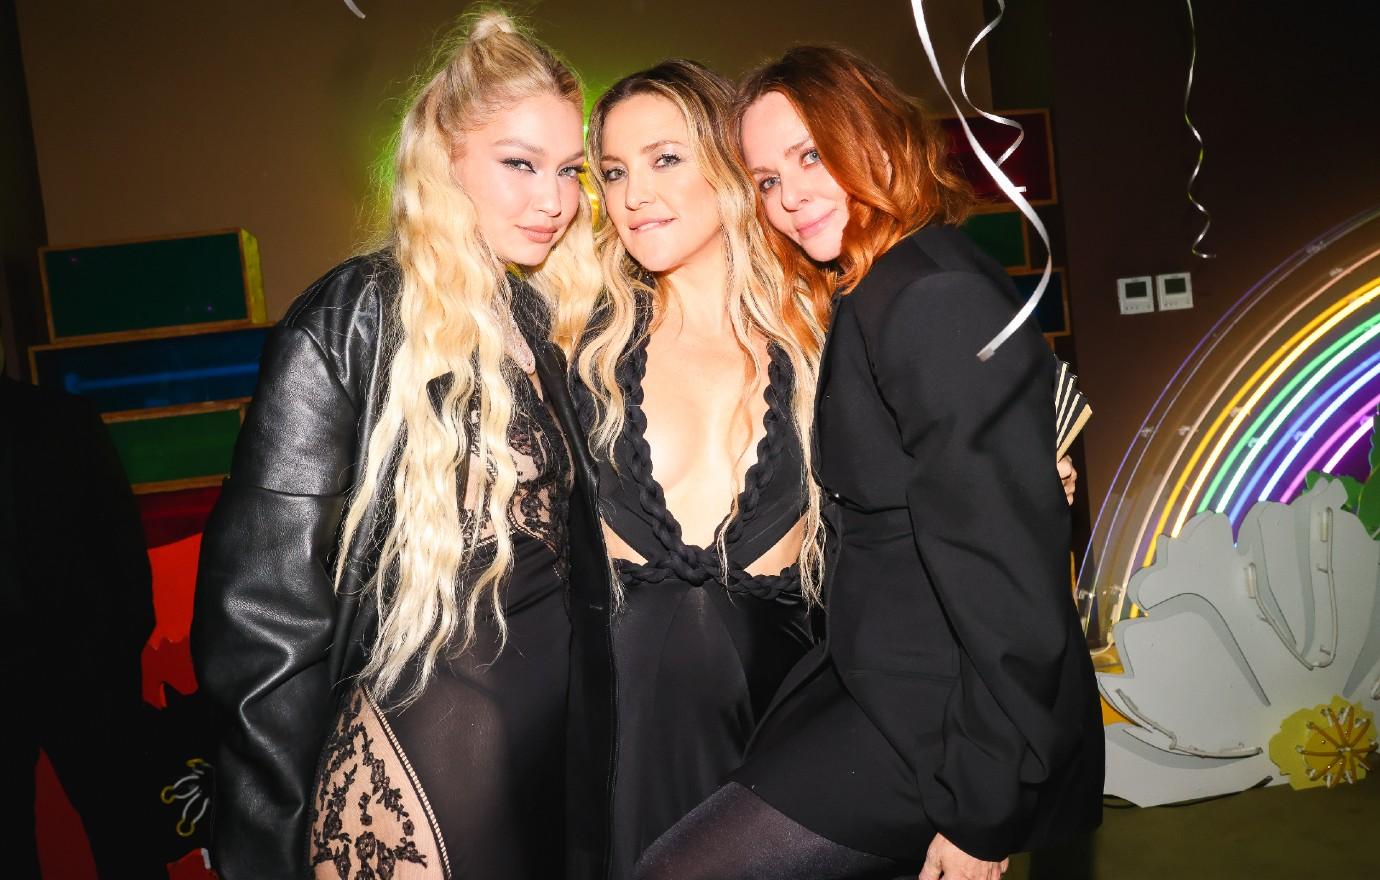 Kate Moss is hoping to follow in BFF Stella McCartney's OBE footsteps